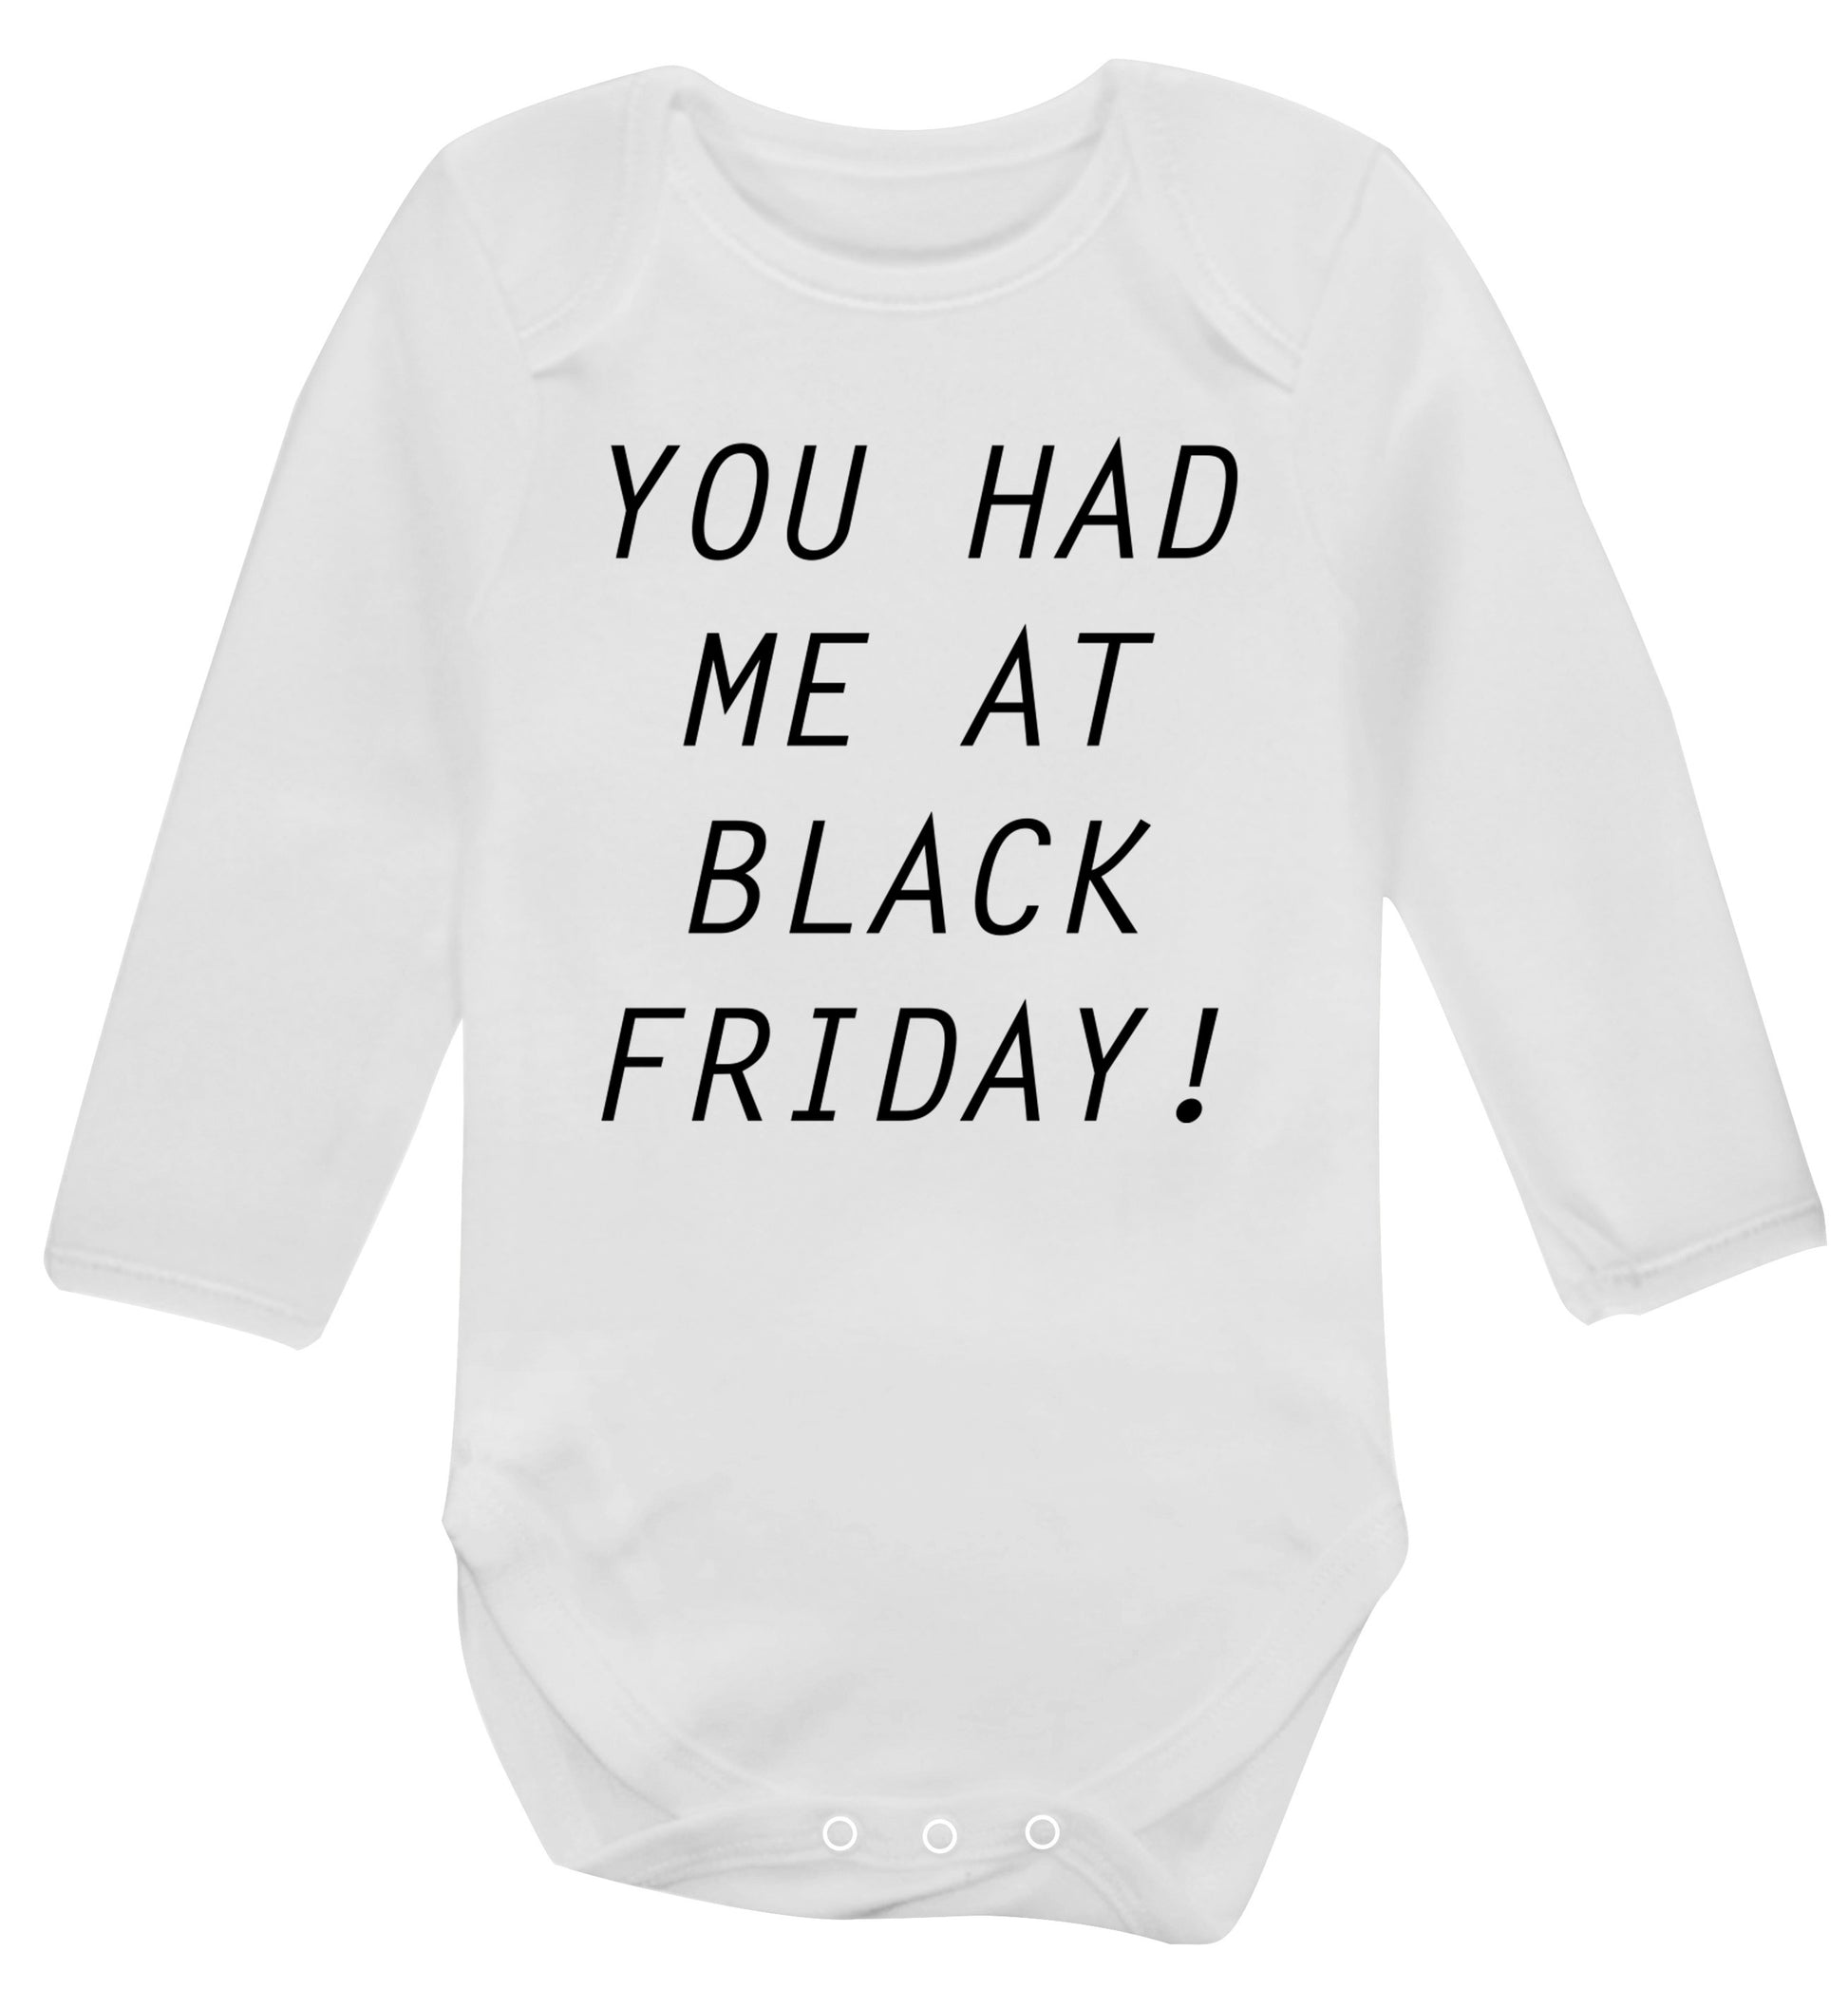 You had me at black friday Baby Vest long sleeved white 6-12 months